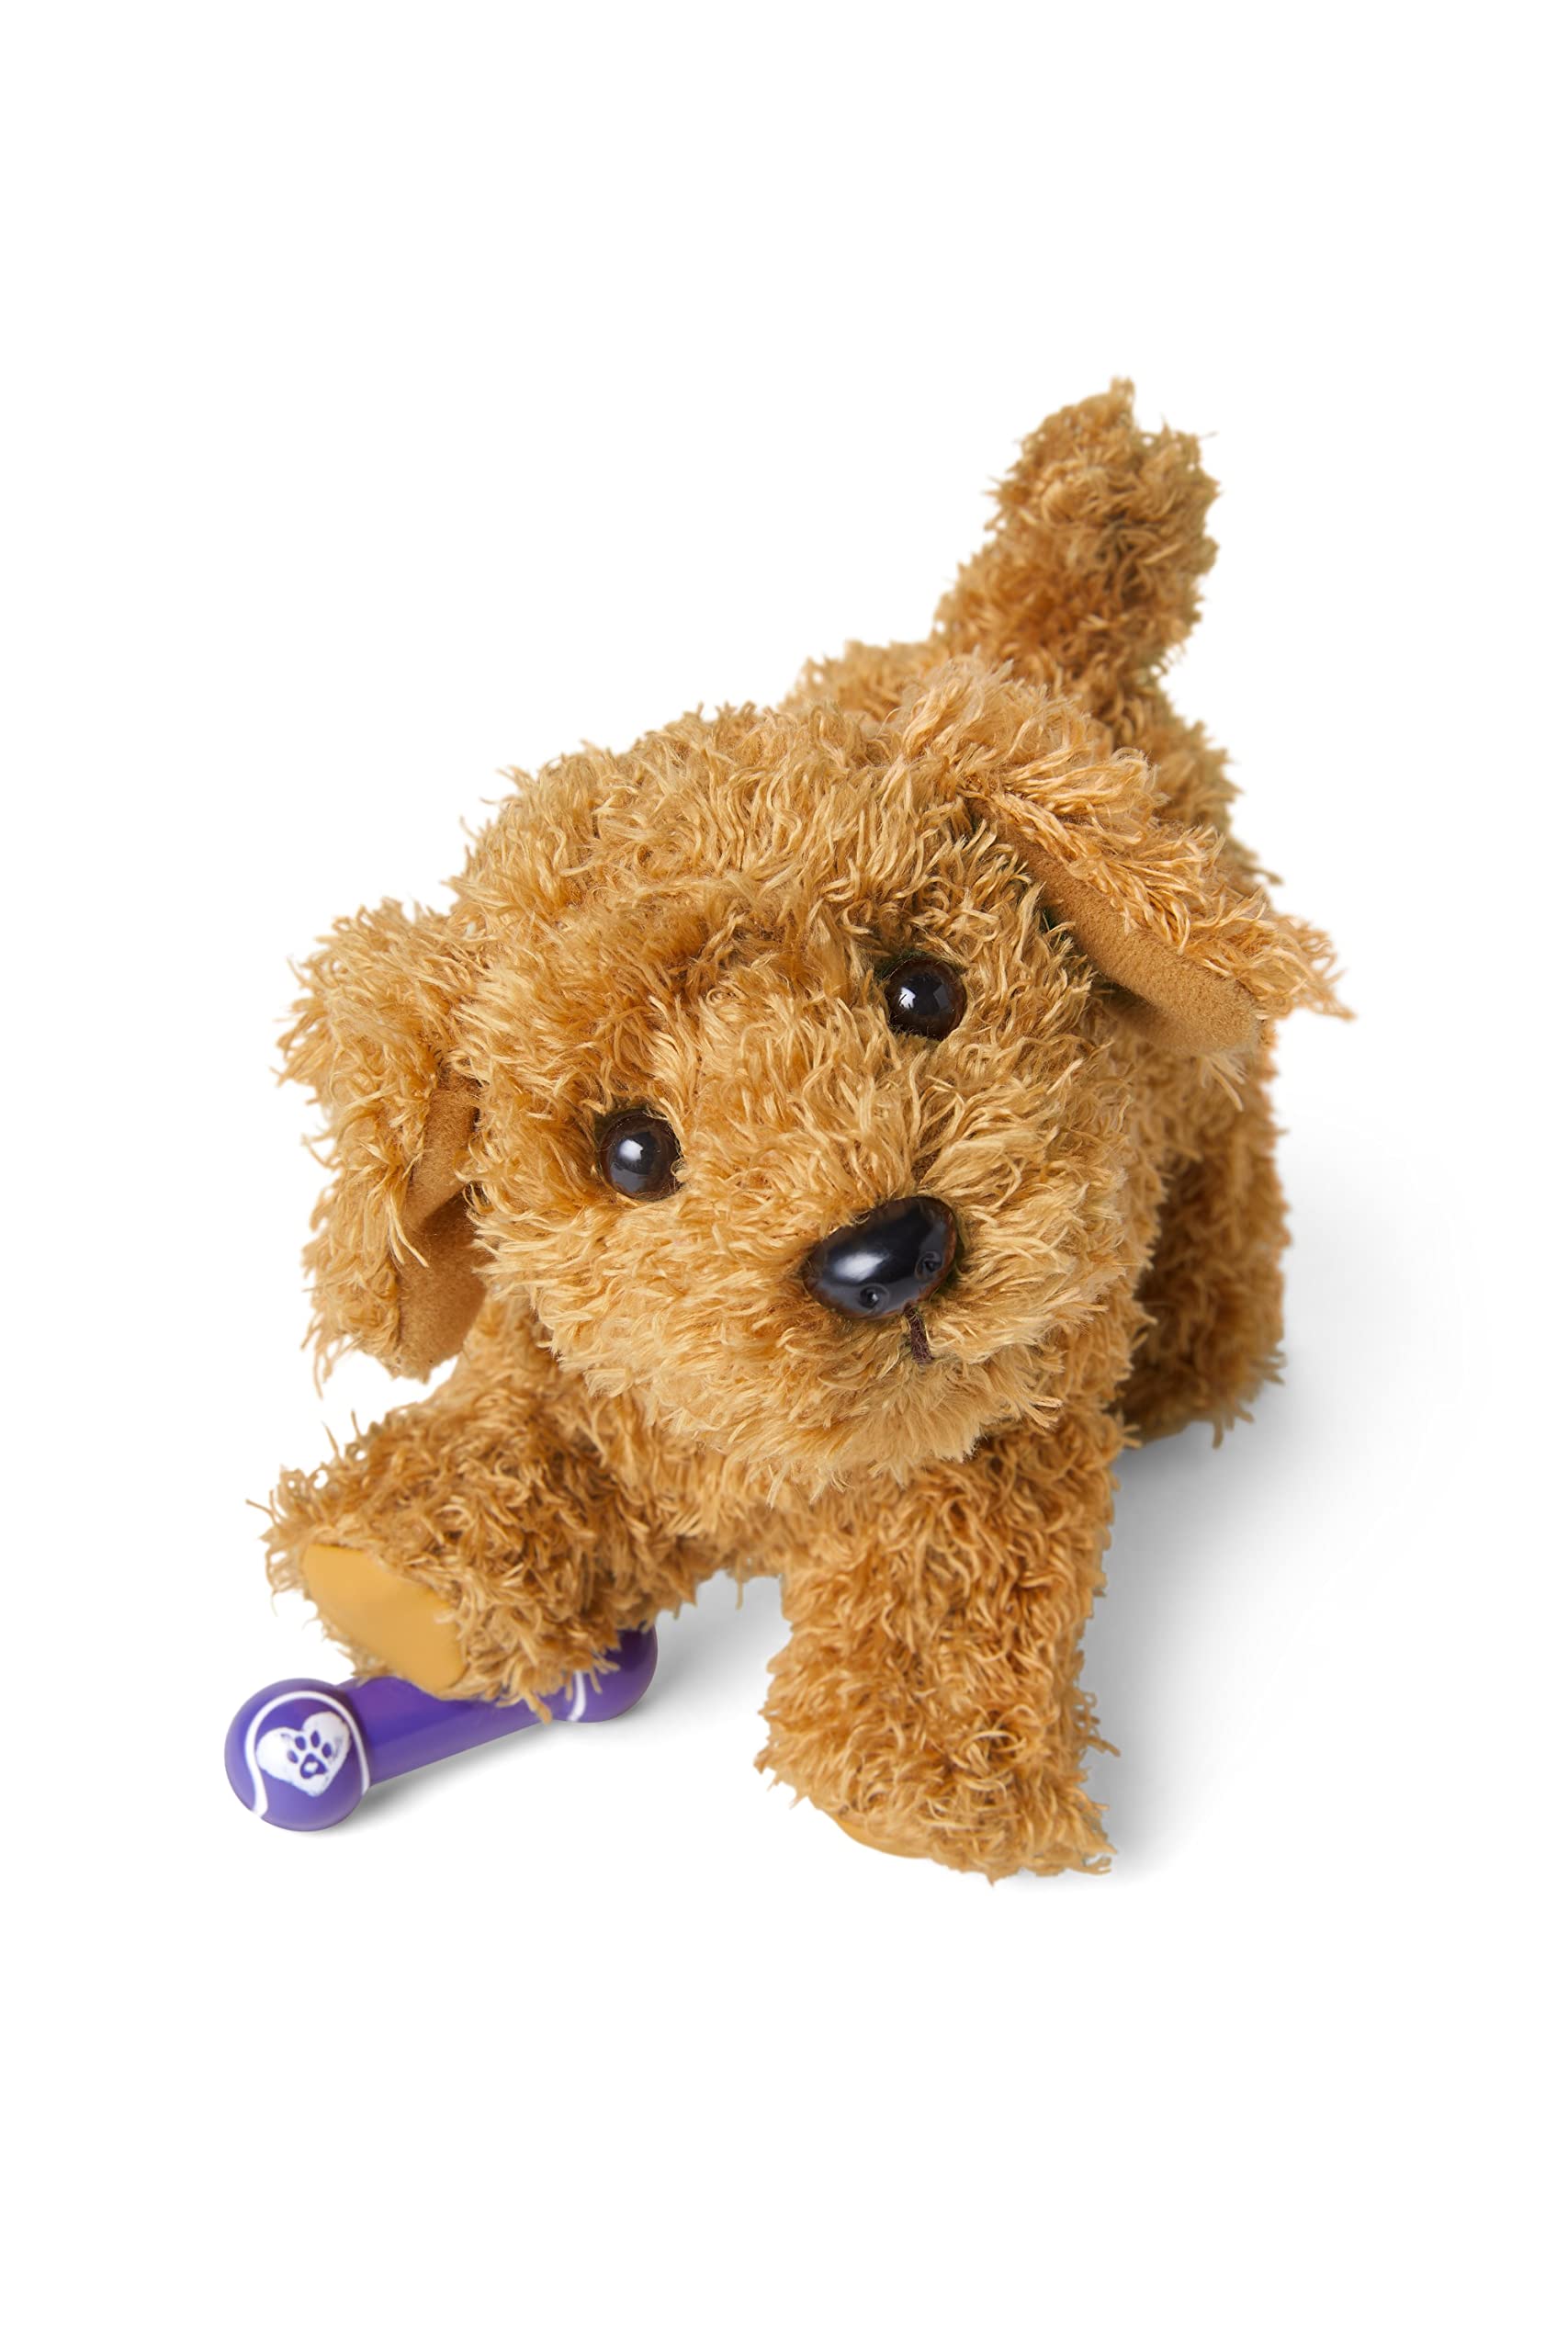 American Girl Truly Me 18-inch Doll Pet Daffodil Doodle Dog with Magnetic Mouth to Hold Her Barbell Toy, For Ages 6+